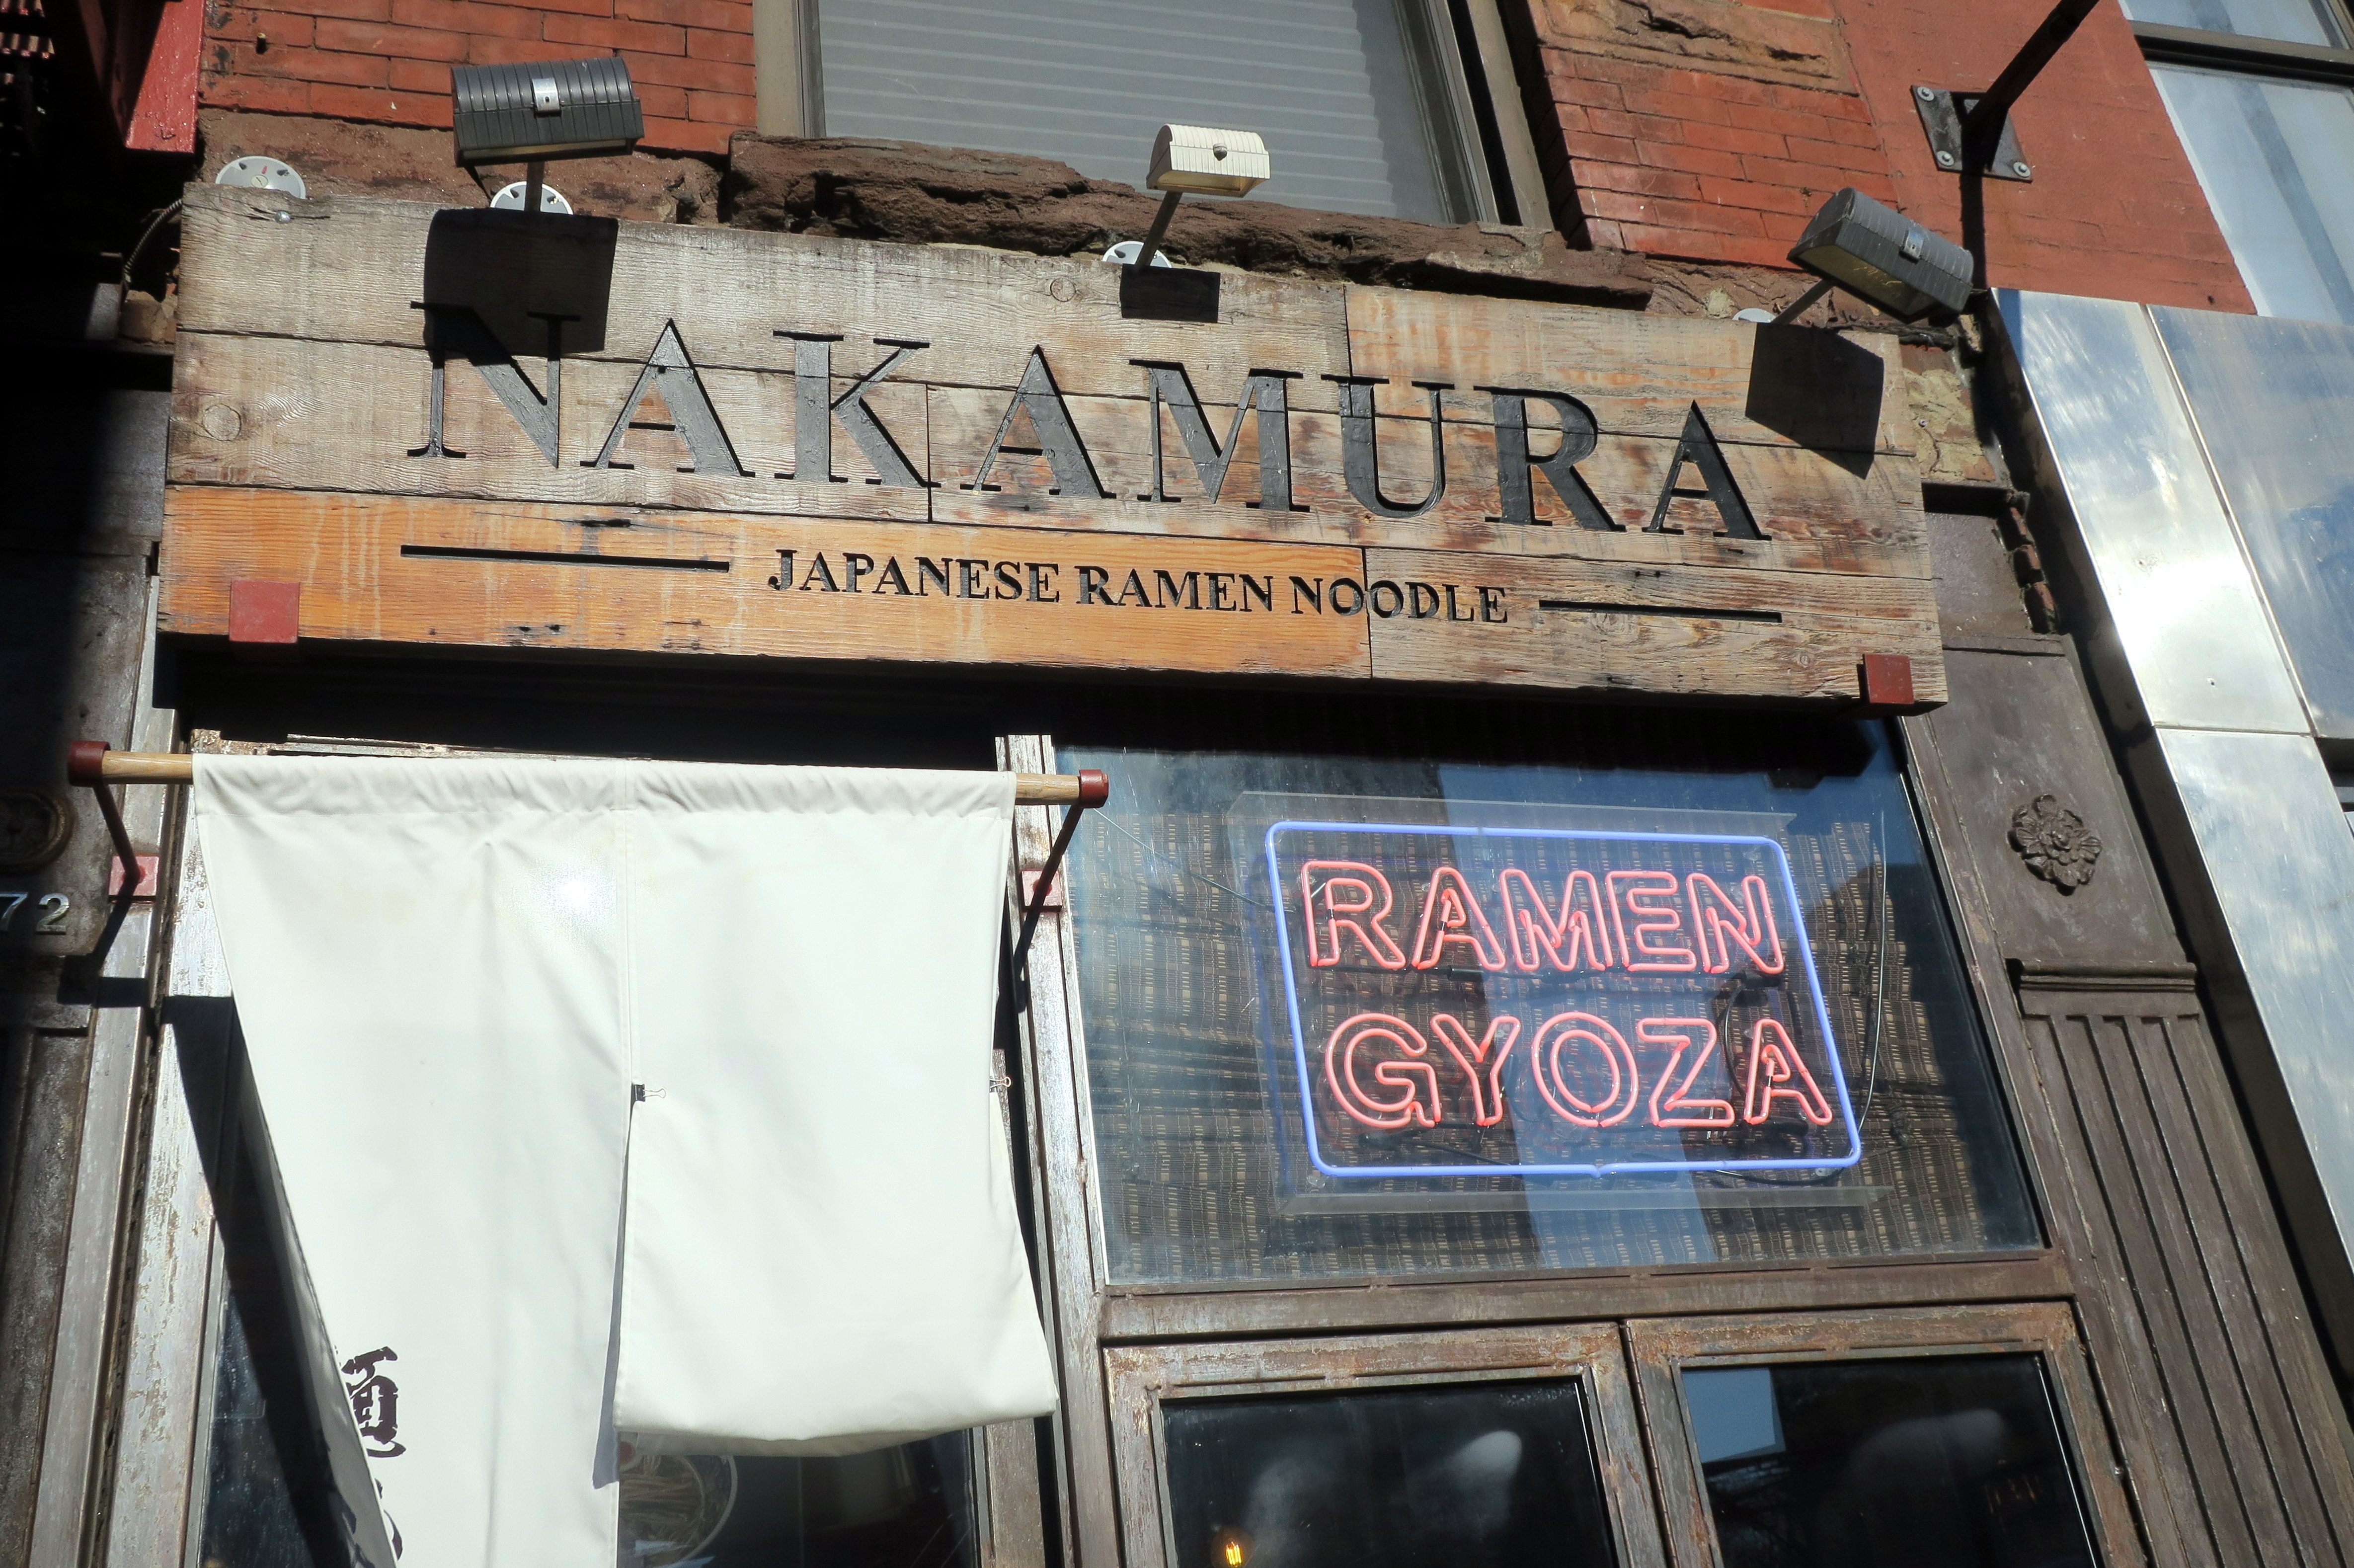 NYC - Nakamura Nakamura, at 172 Delancey Street, was opened in 2016 by Chef Shigetoshi "Jack" Nakamura. Chef Naka, hailed as one of four "Ramen Gods" opened Nakmura-Ya in Japan when he was only 22 before partnering with Sun Noodle to serve ramen flights at their Ramen Lab in the U.S.